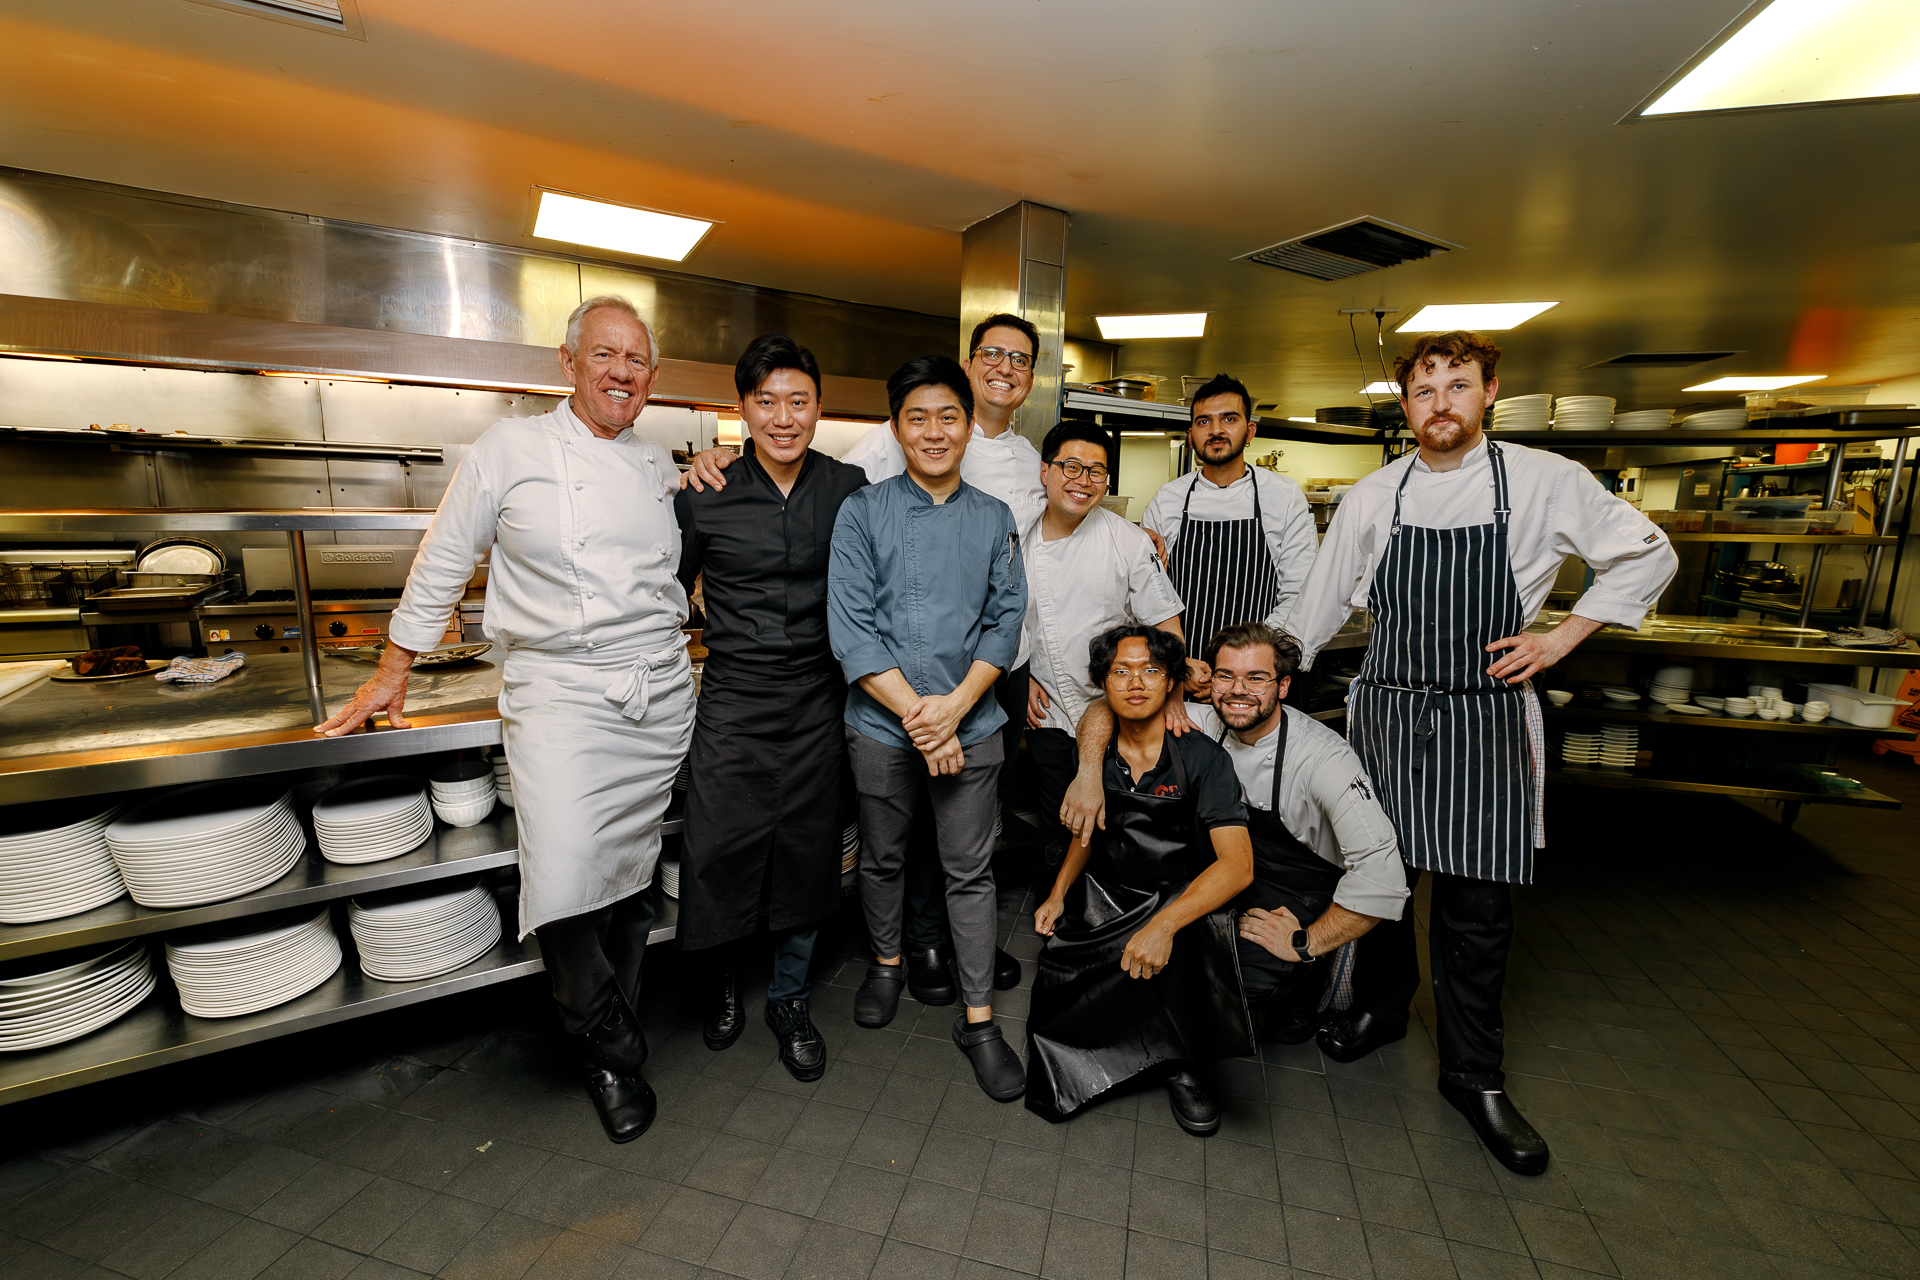 Group image of chefs in the Fraser's Restaurant kitchen at the Four Hands Dinner